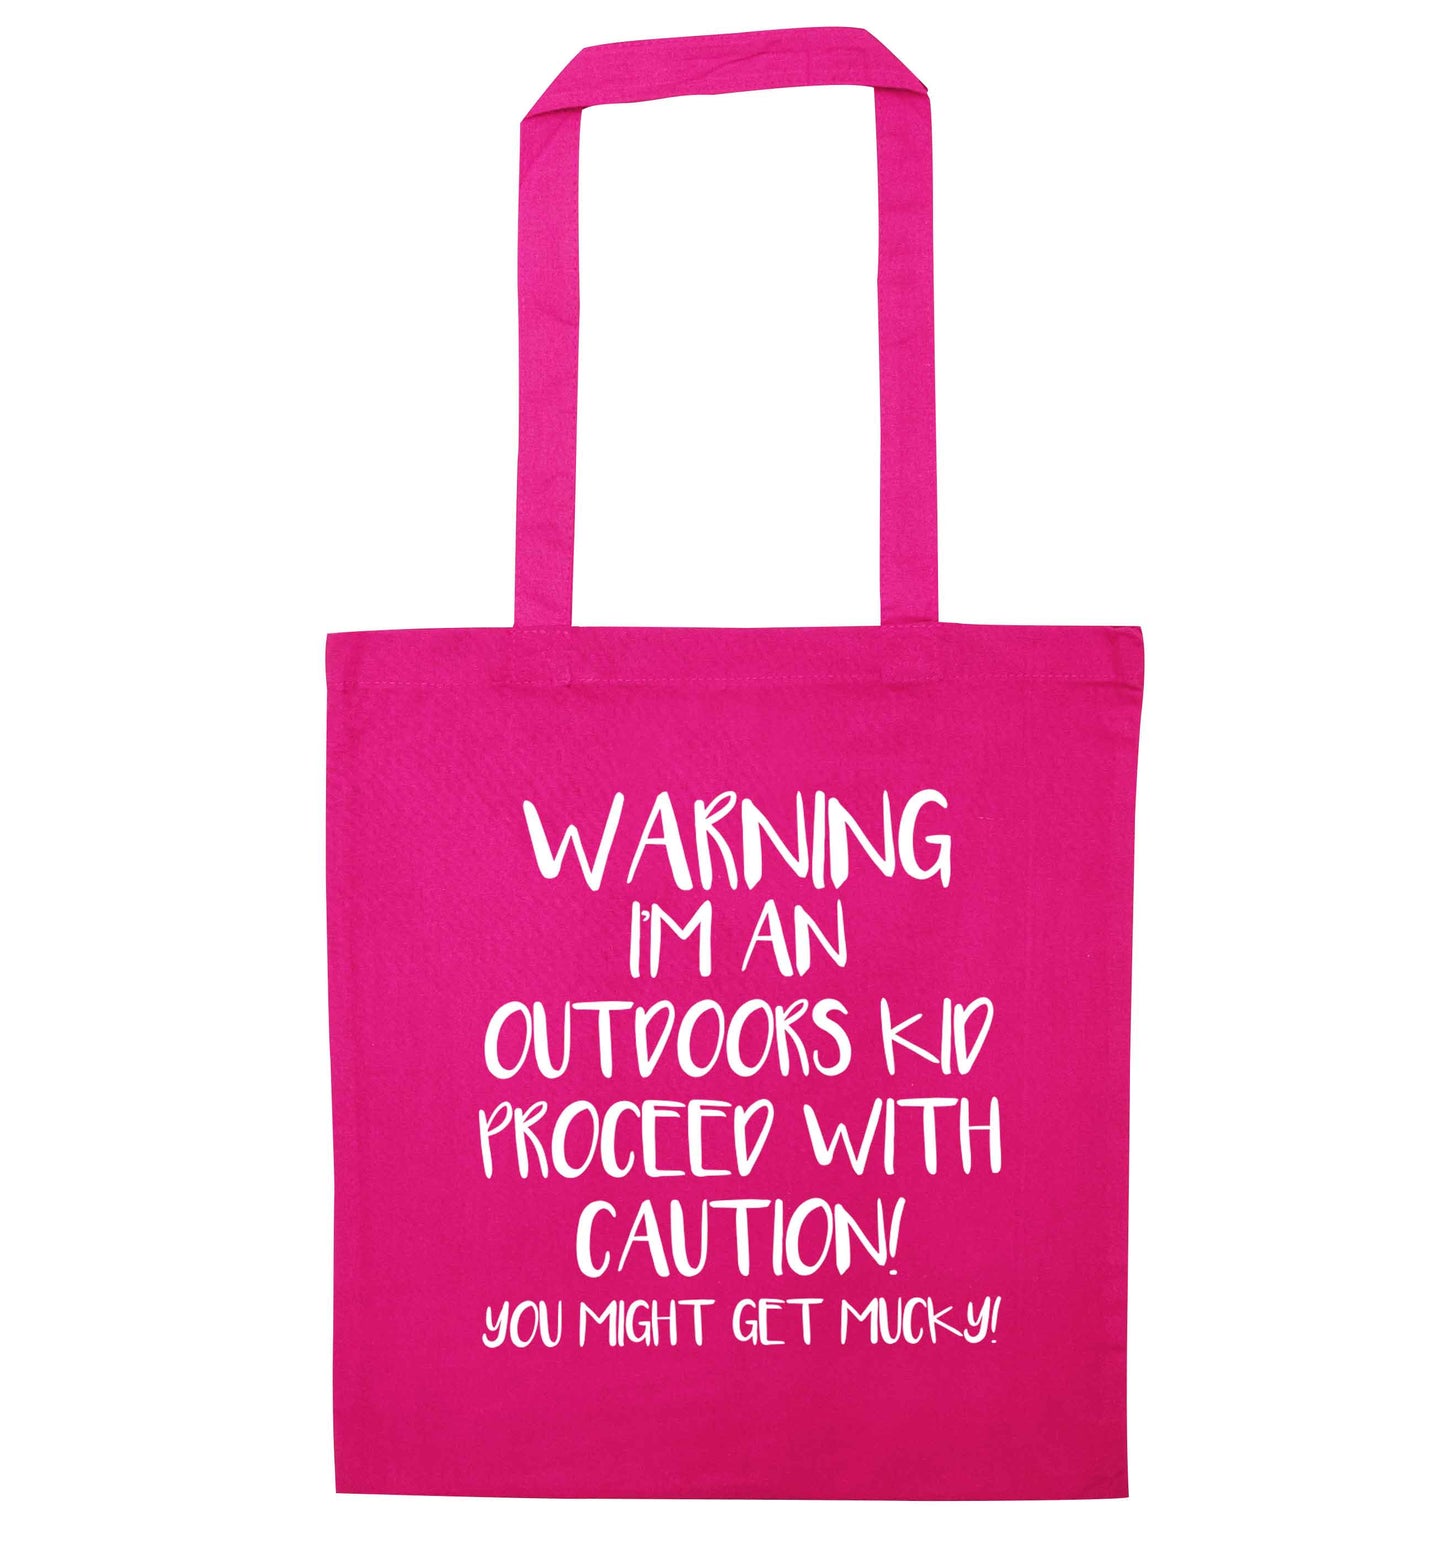 Warning I'm an outdoors kid! Proceed with caution you might get mucky pink tote bag